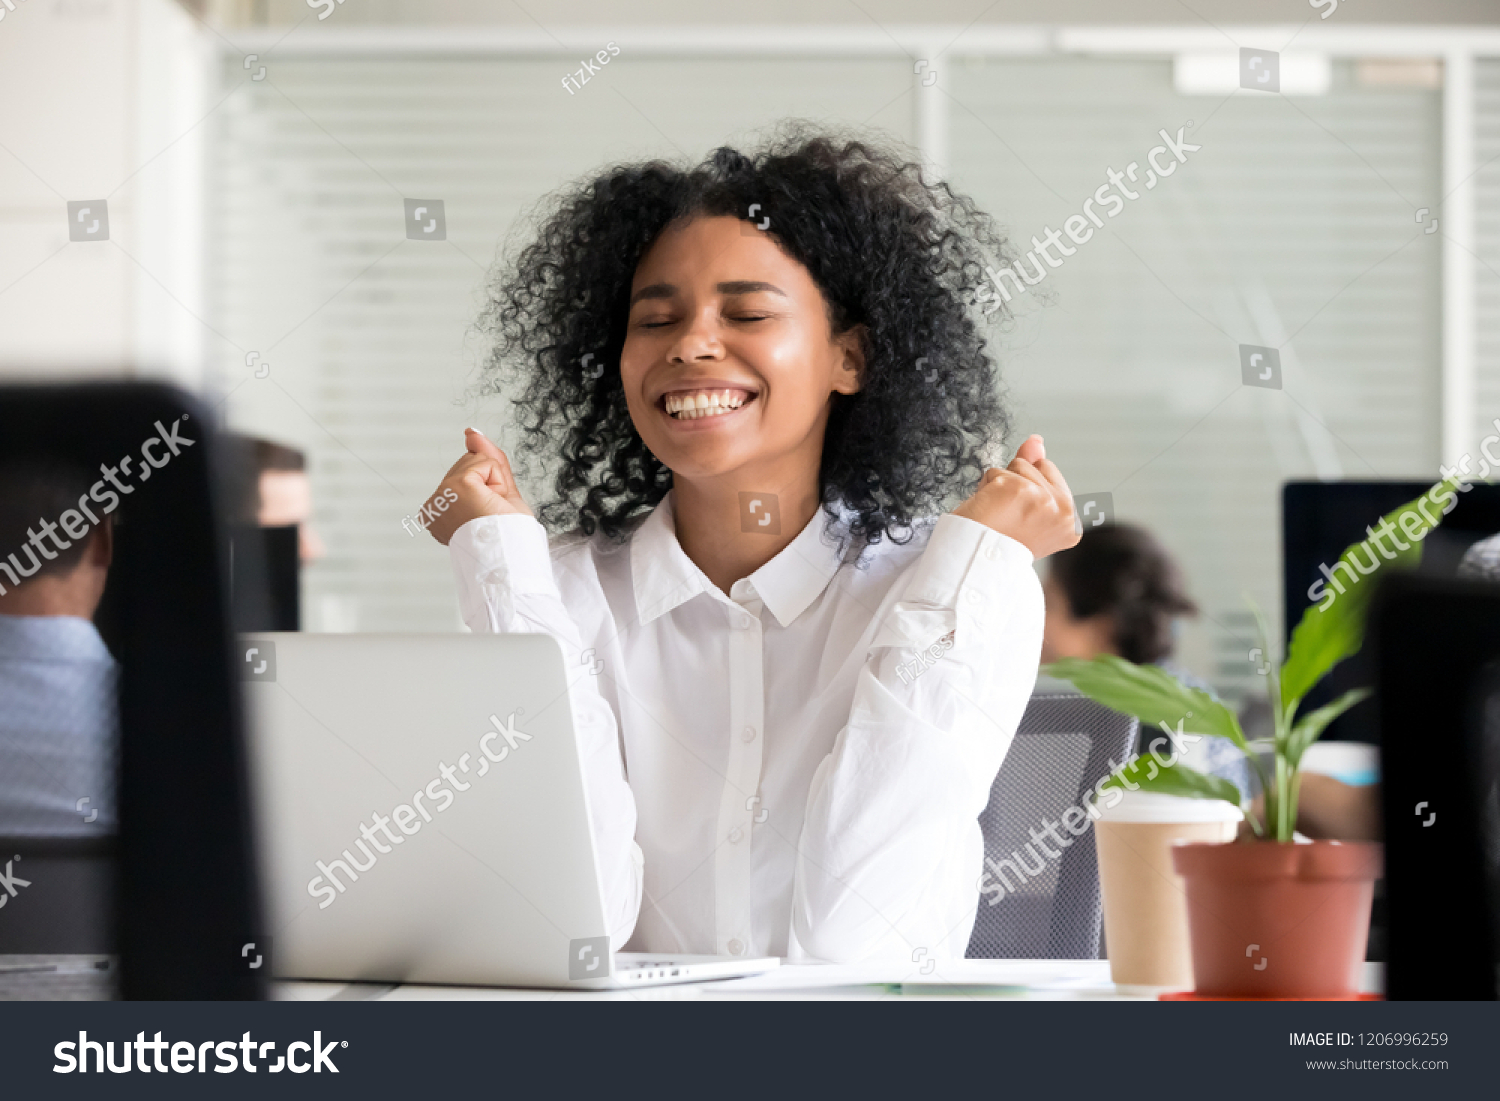 Excited african office worker student receiving good news in email on laptop, motivated happy black female employee getting promoted or rewarded celebrating great result achievement win opportunity #1206996259